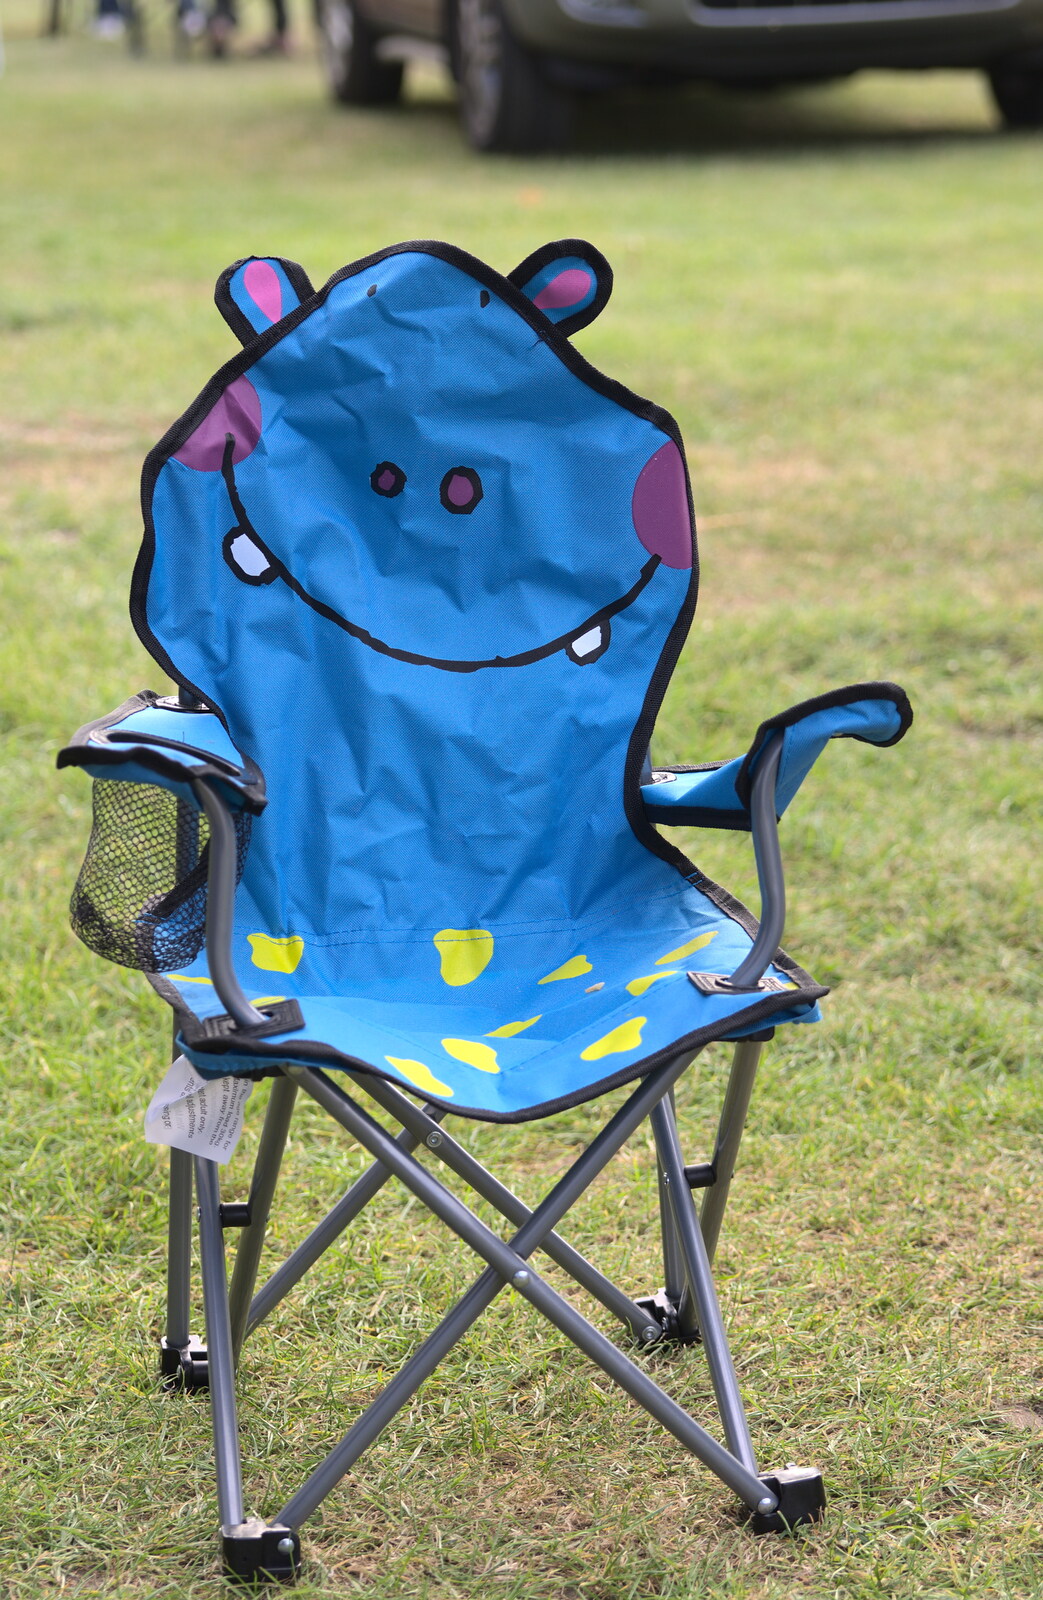 Harry's new chair from A Weekend in the Camper Van, West Harling, Norfolk - 21st June 2014